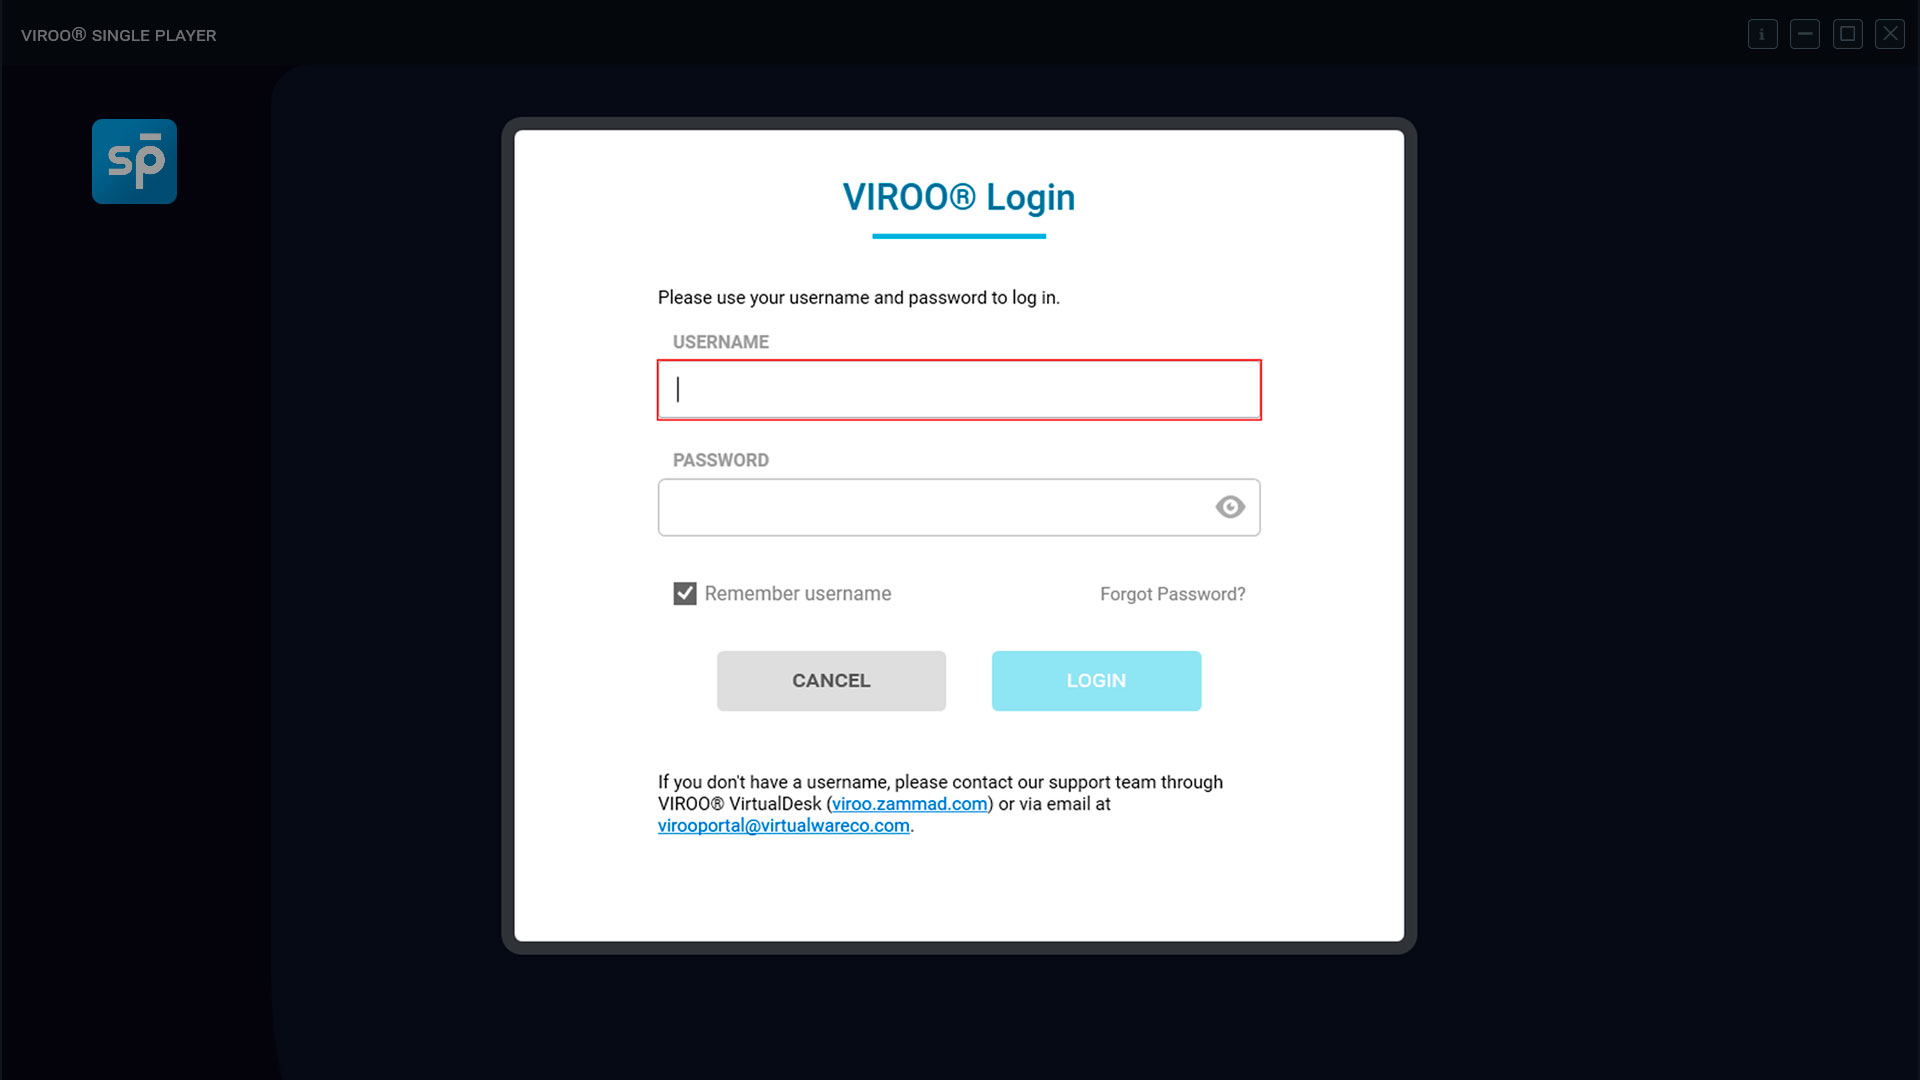 VIROO_24Release_Identity_Management